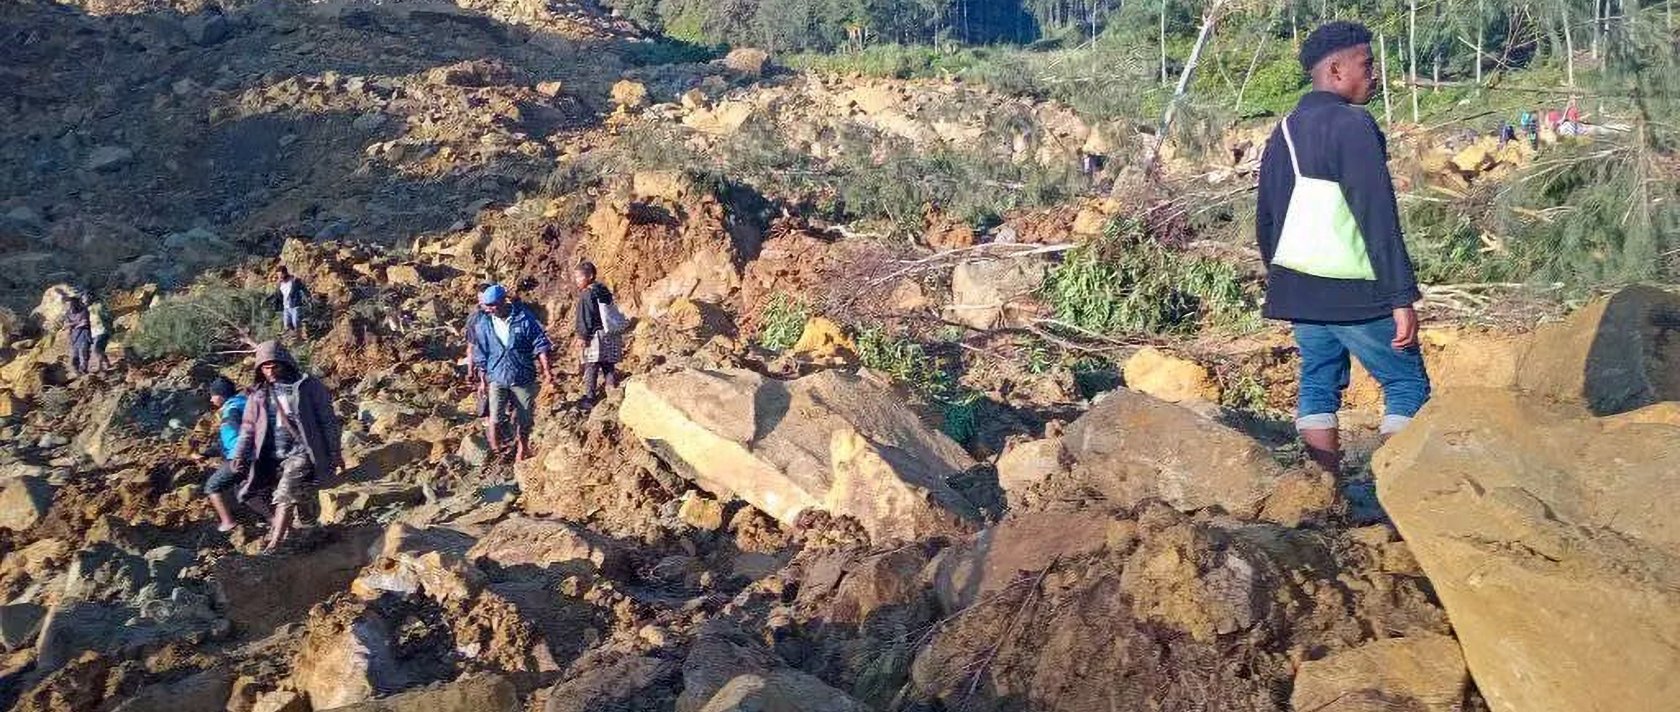 People walk with their belongings in the area where a landslide hit the village of Kaokalam, Enga province, Papua New Guinea, May 24, 2024. ()